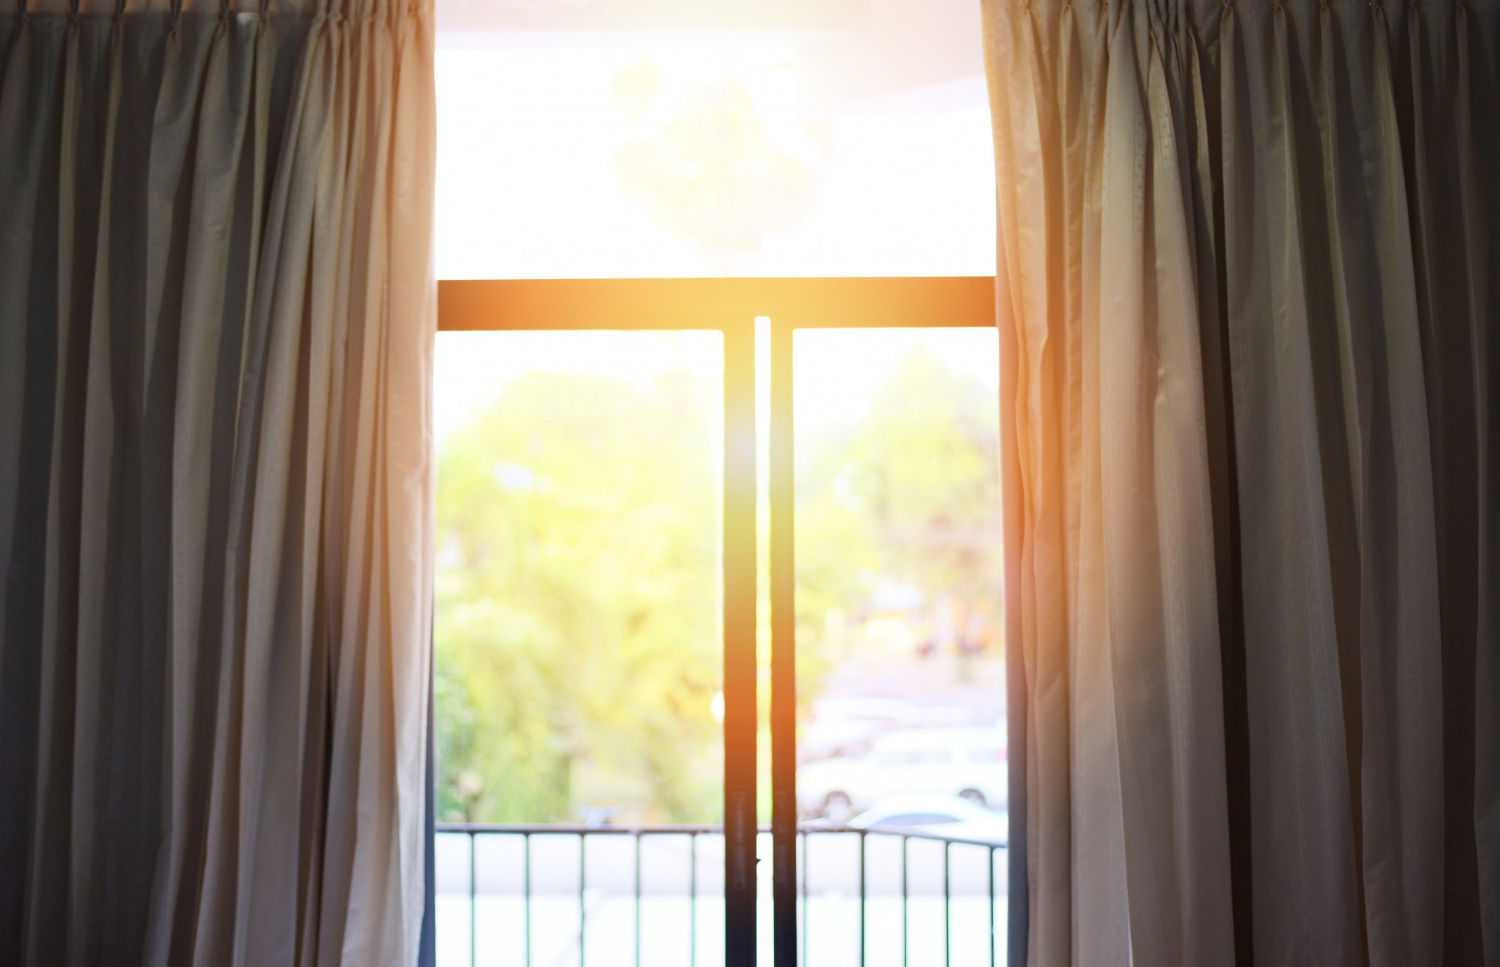 Blinds, curtains, drapes – what to decorate the windows with?